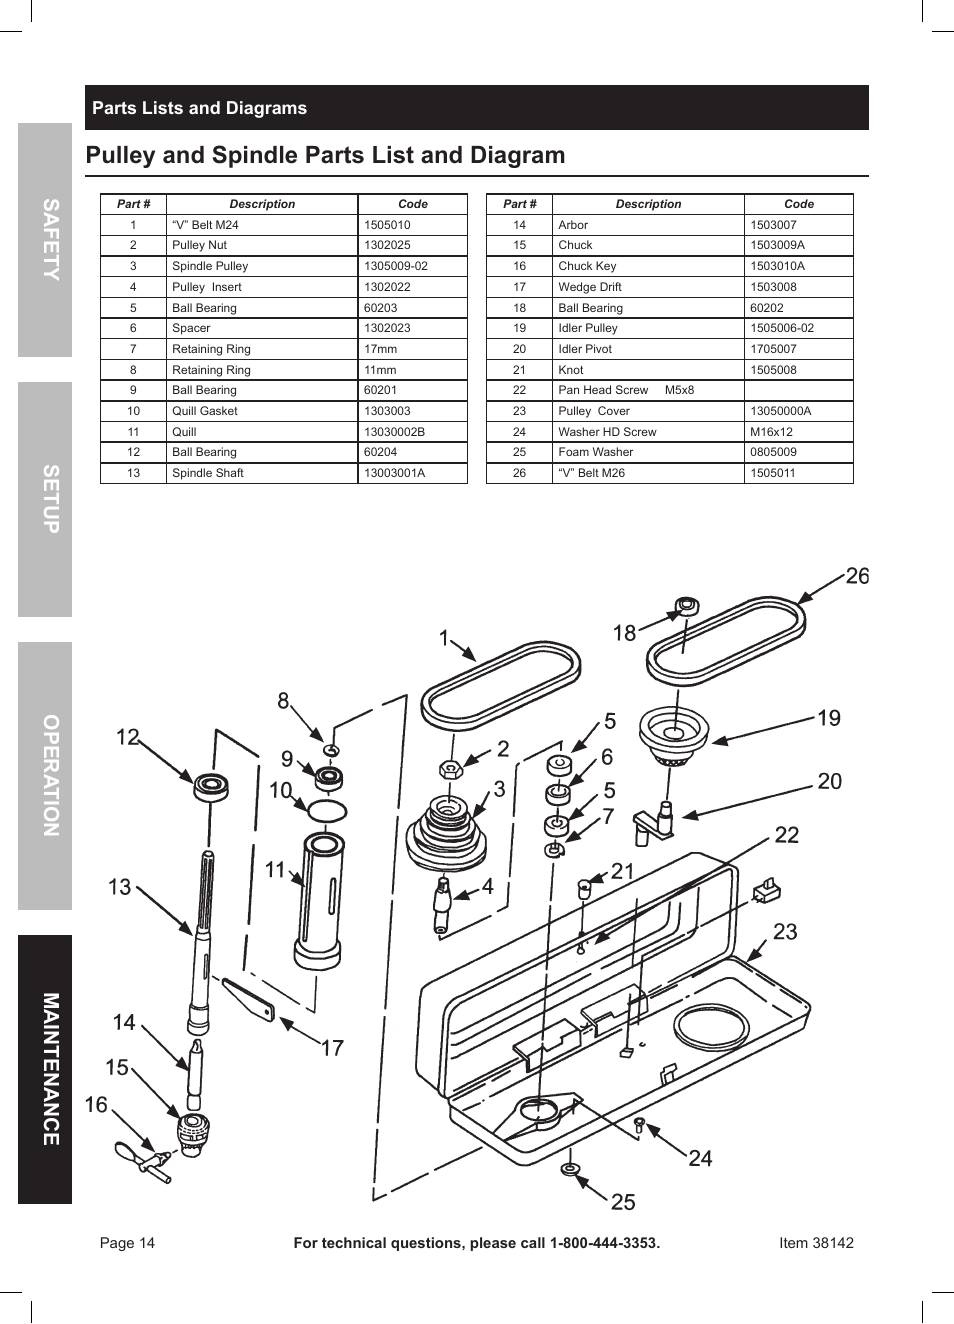 Pulley and spindle parts list and diagram, Safety opera tion